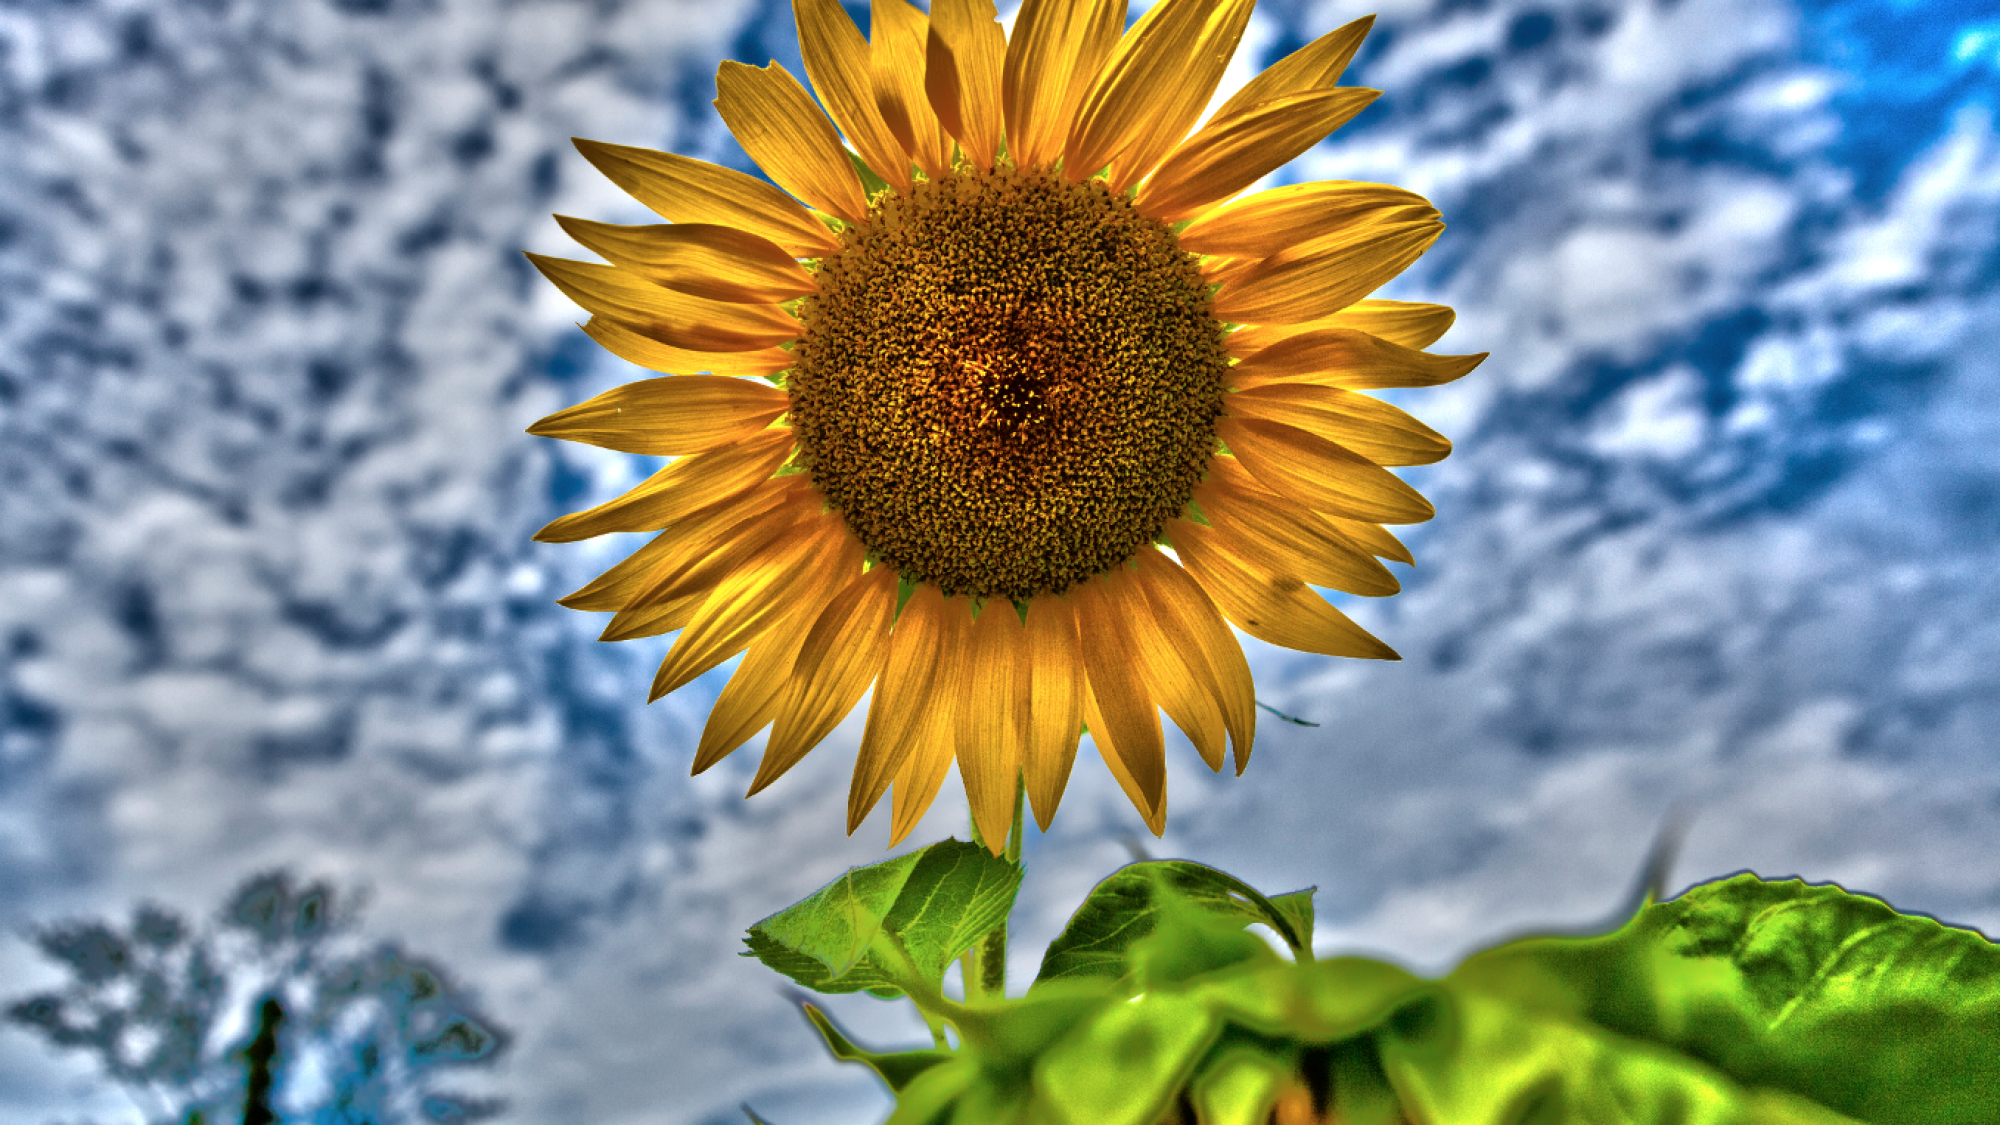 Featured Photoshop HDR